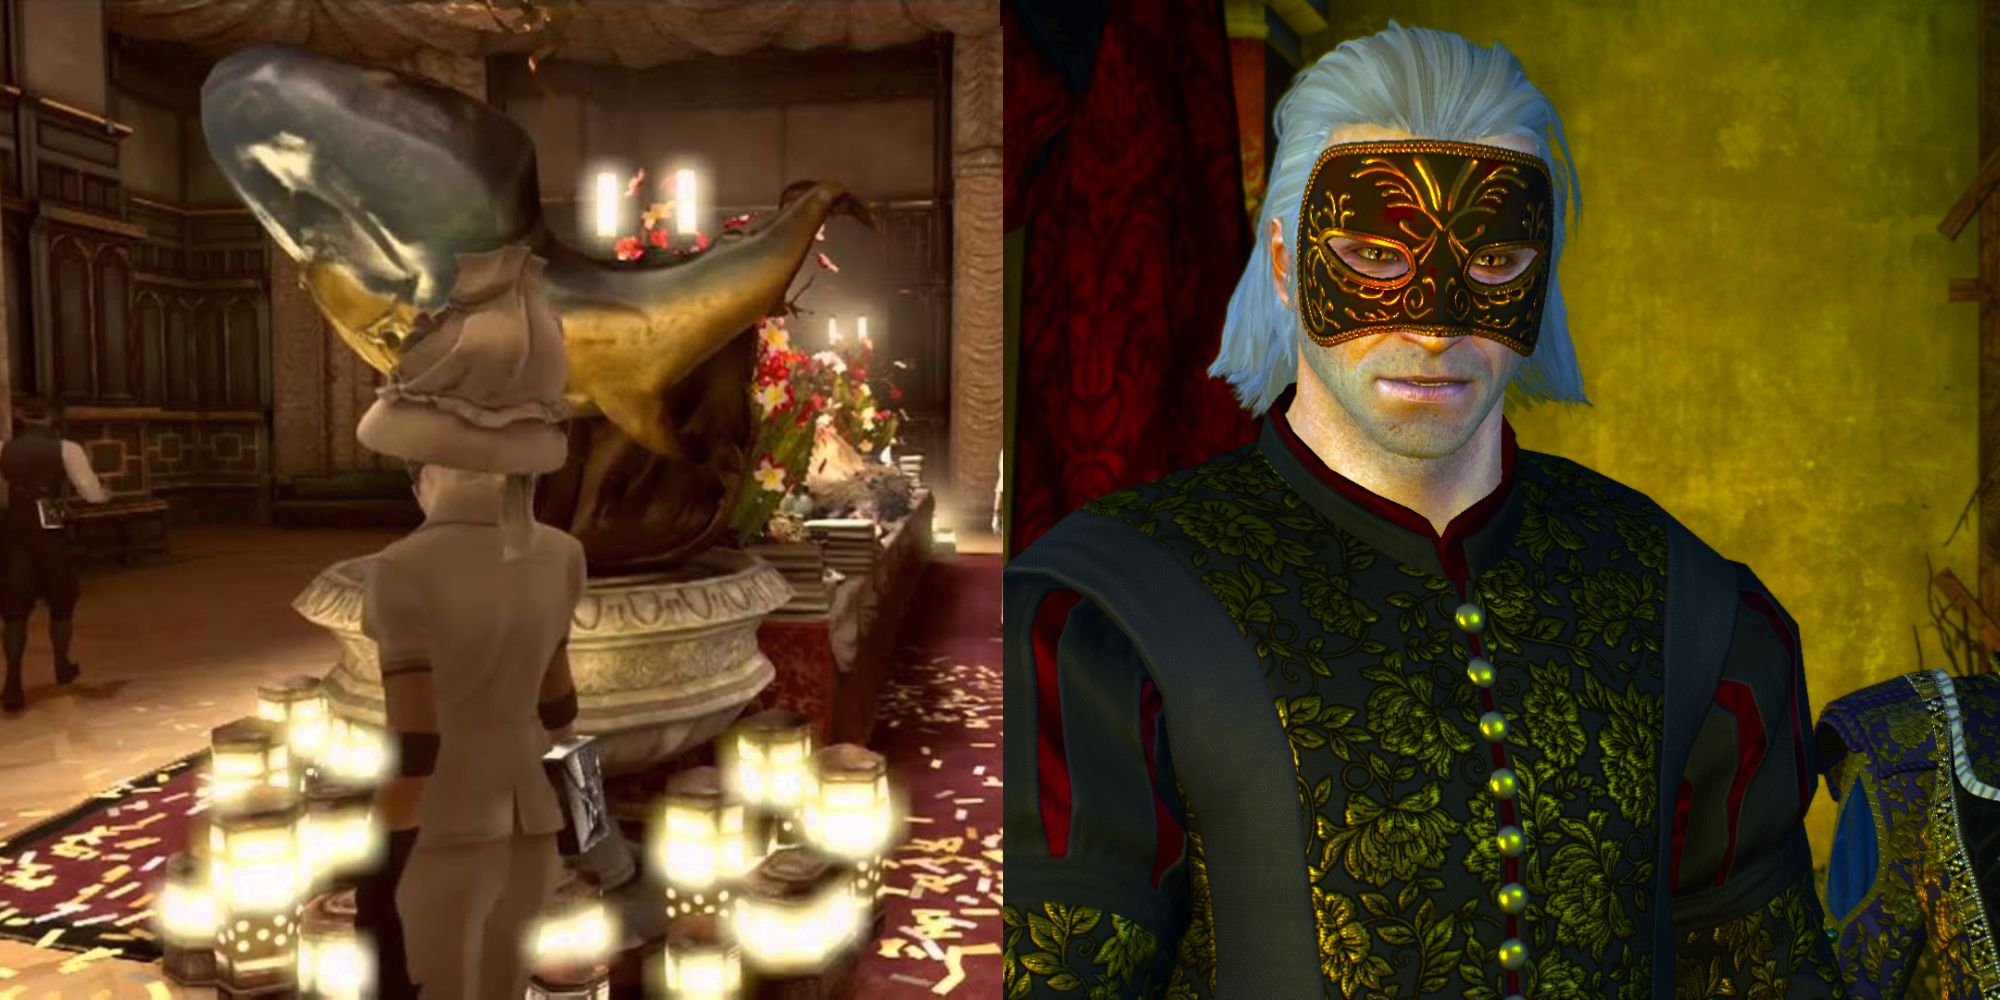 A split image demonstrating the masquerade infiltration missions from Dishonored and The Witcher 3.